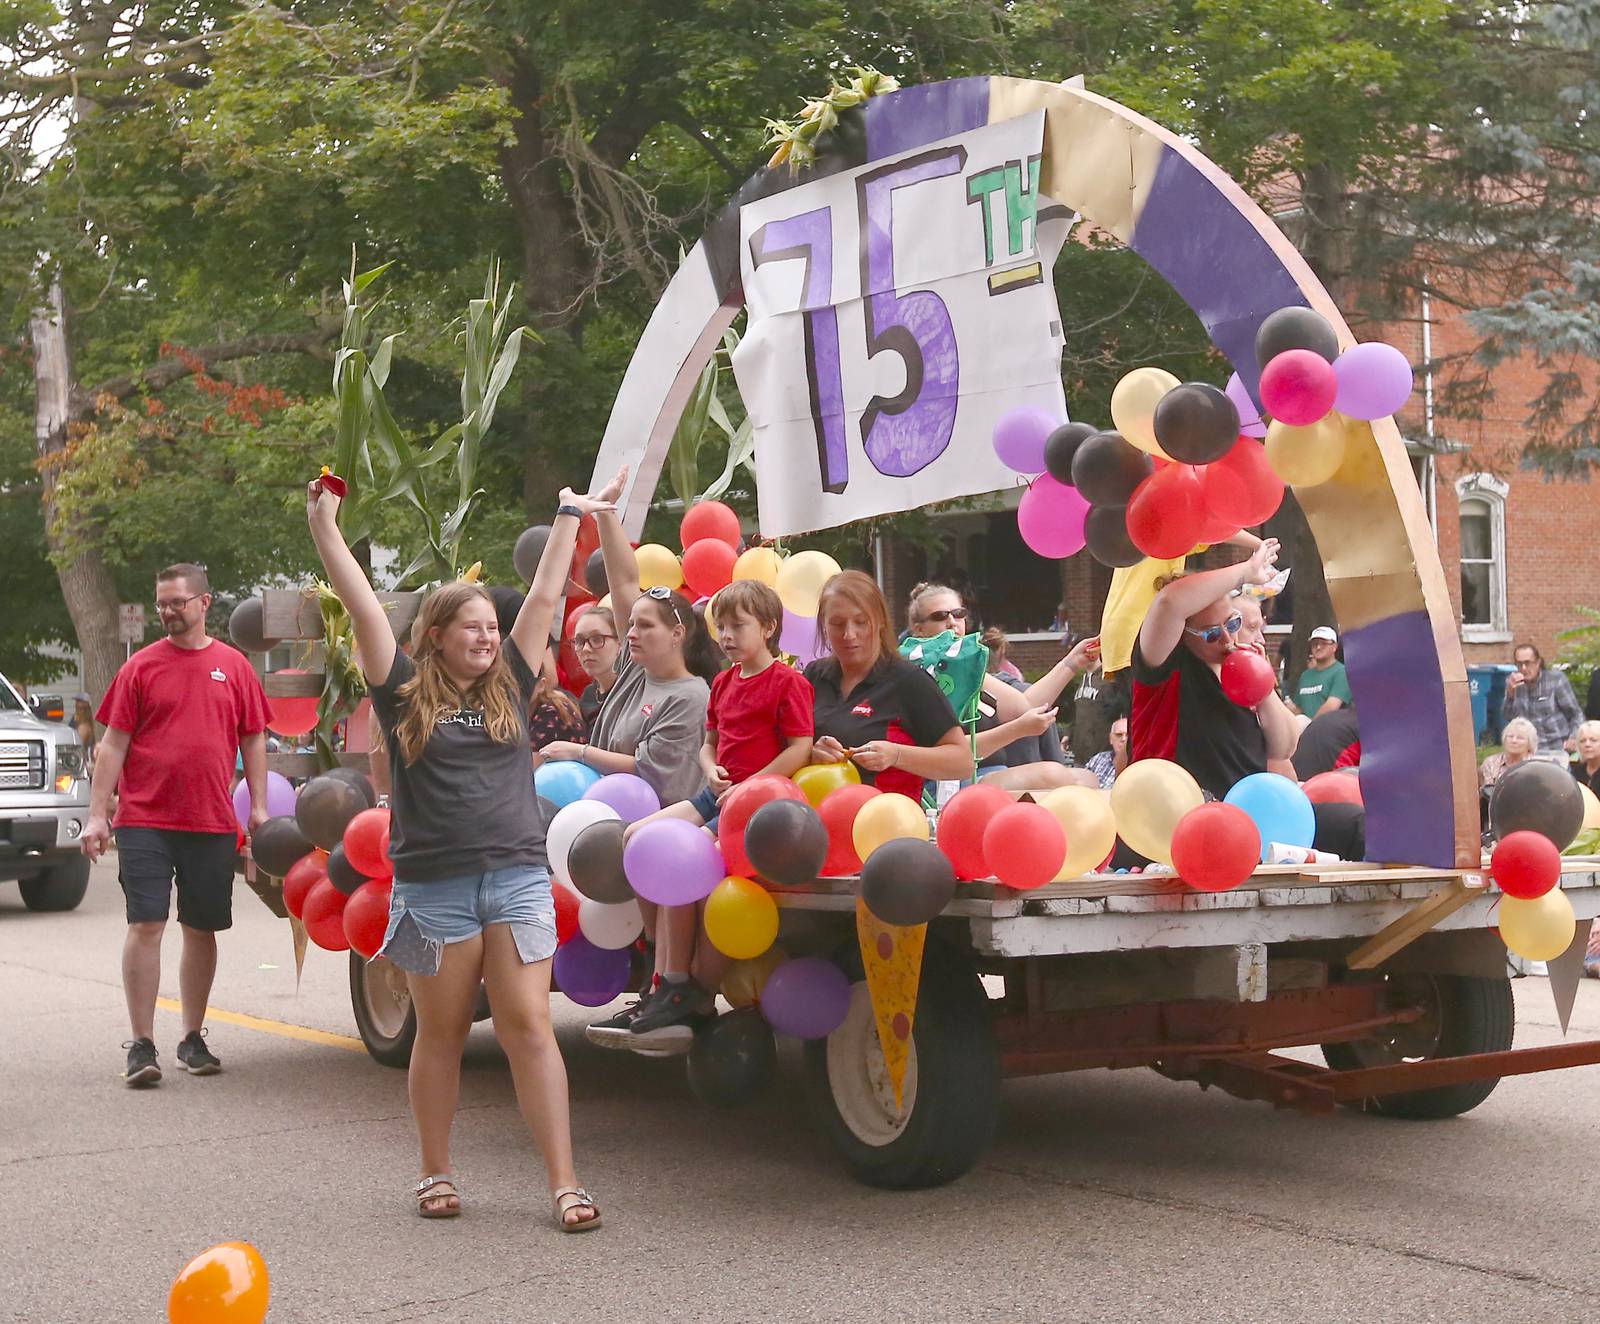 Photos 75th annual Mendota Sweet Corn Festival and parade Shaw Local